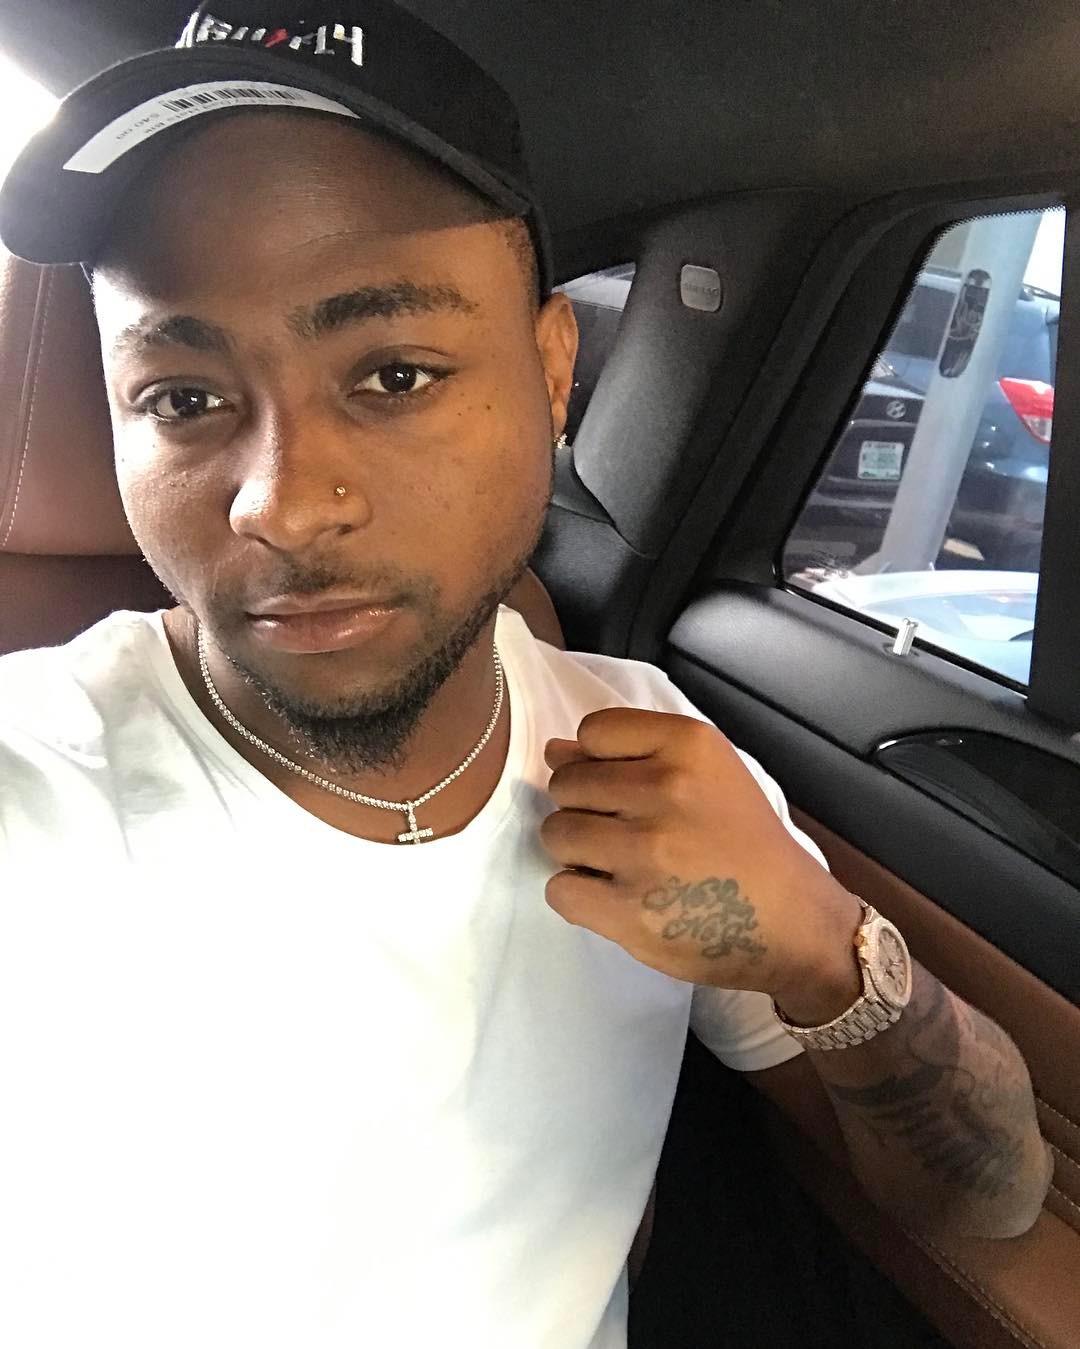 Davido’s One-Year-Old Daughter Imade Singing Along To His Hit Song “If”